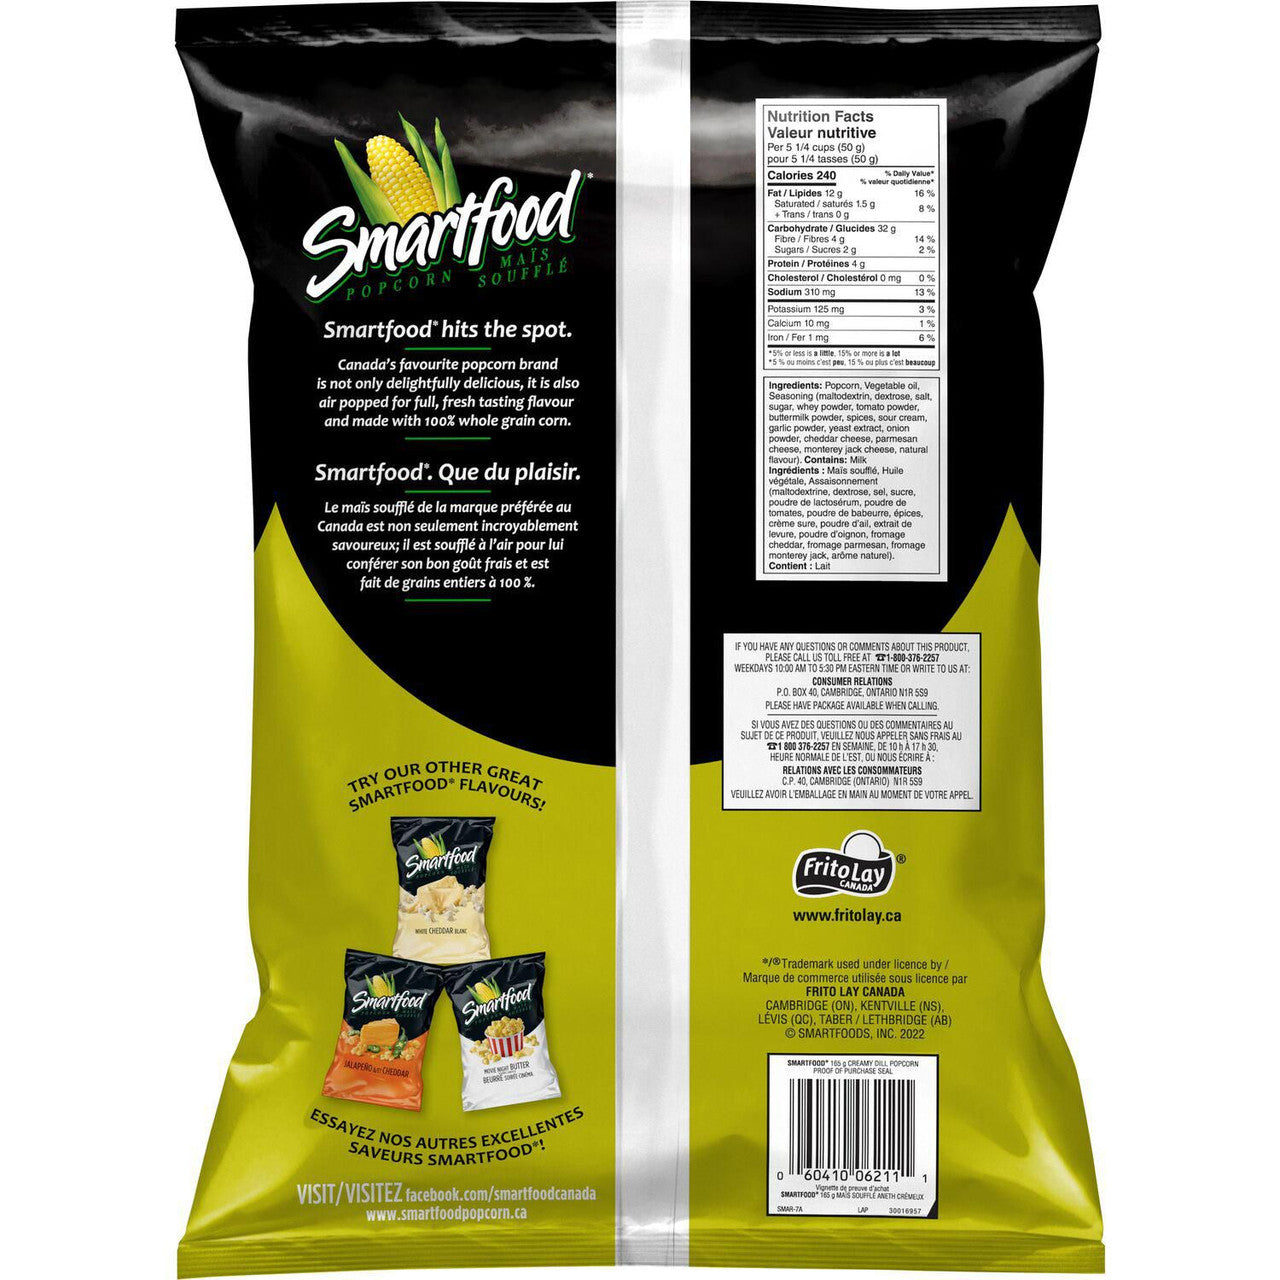 Smartfood Creamy Dill Ready to Eat Popcorn, 165g/5.8 oz., {Imported from Canada}